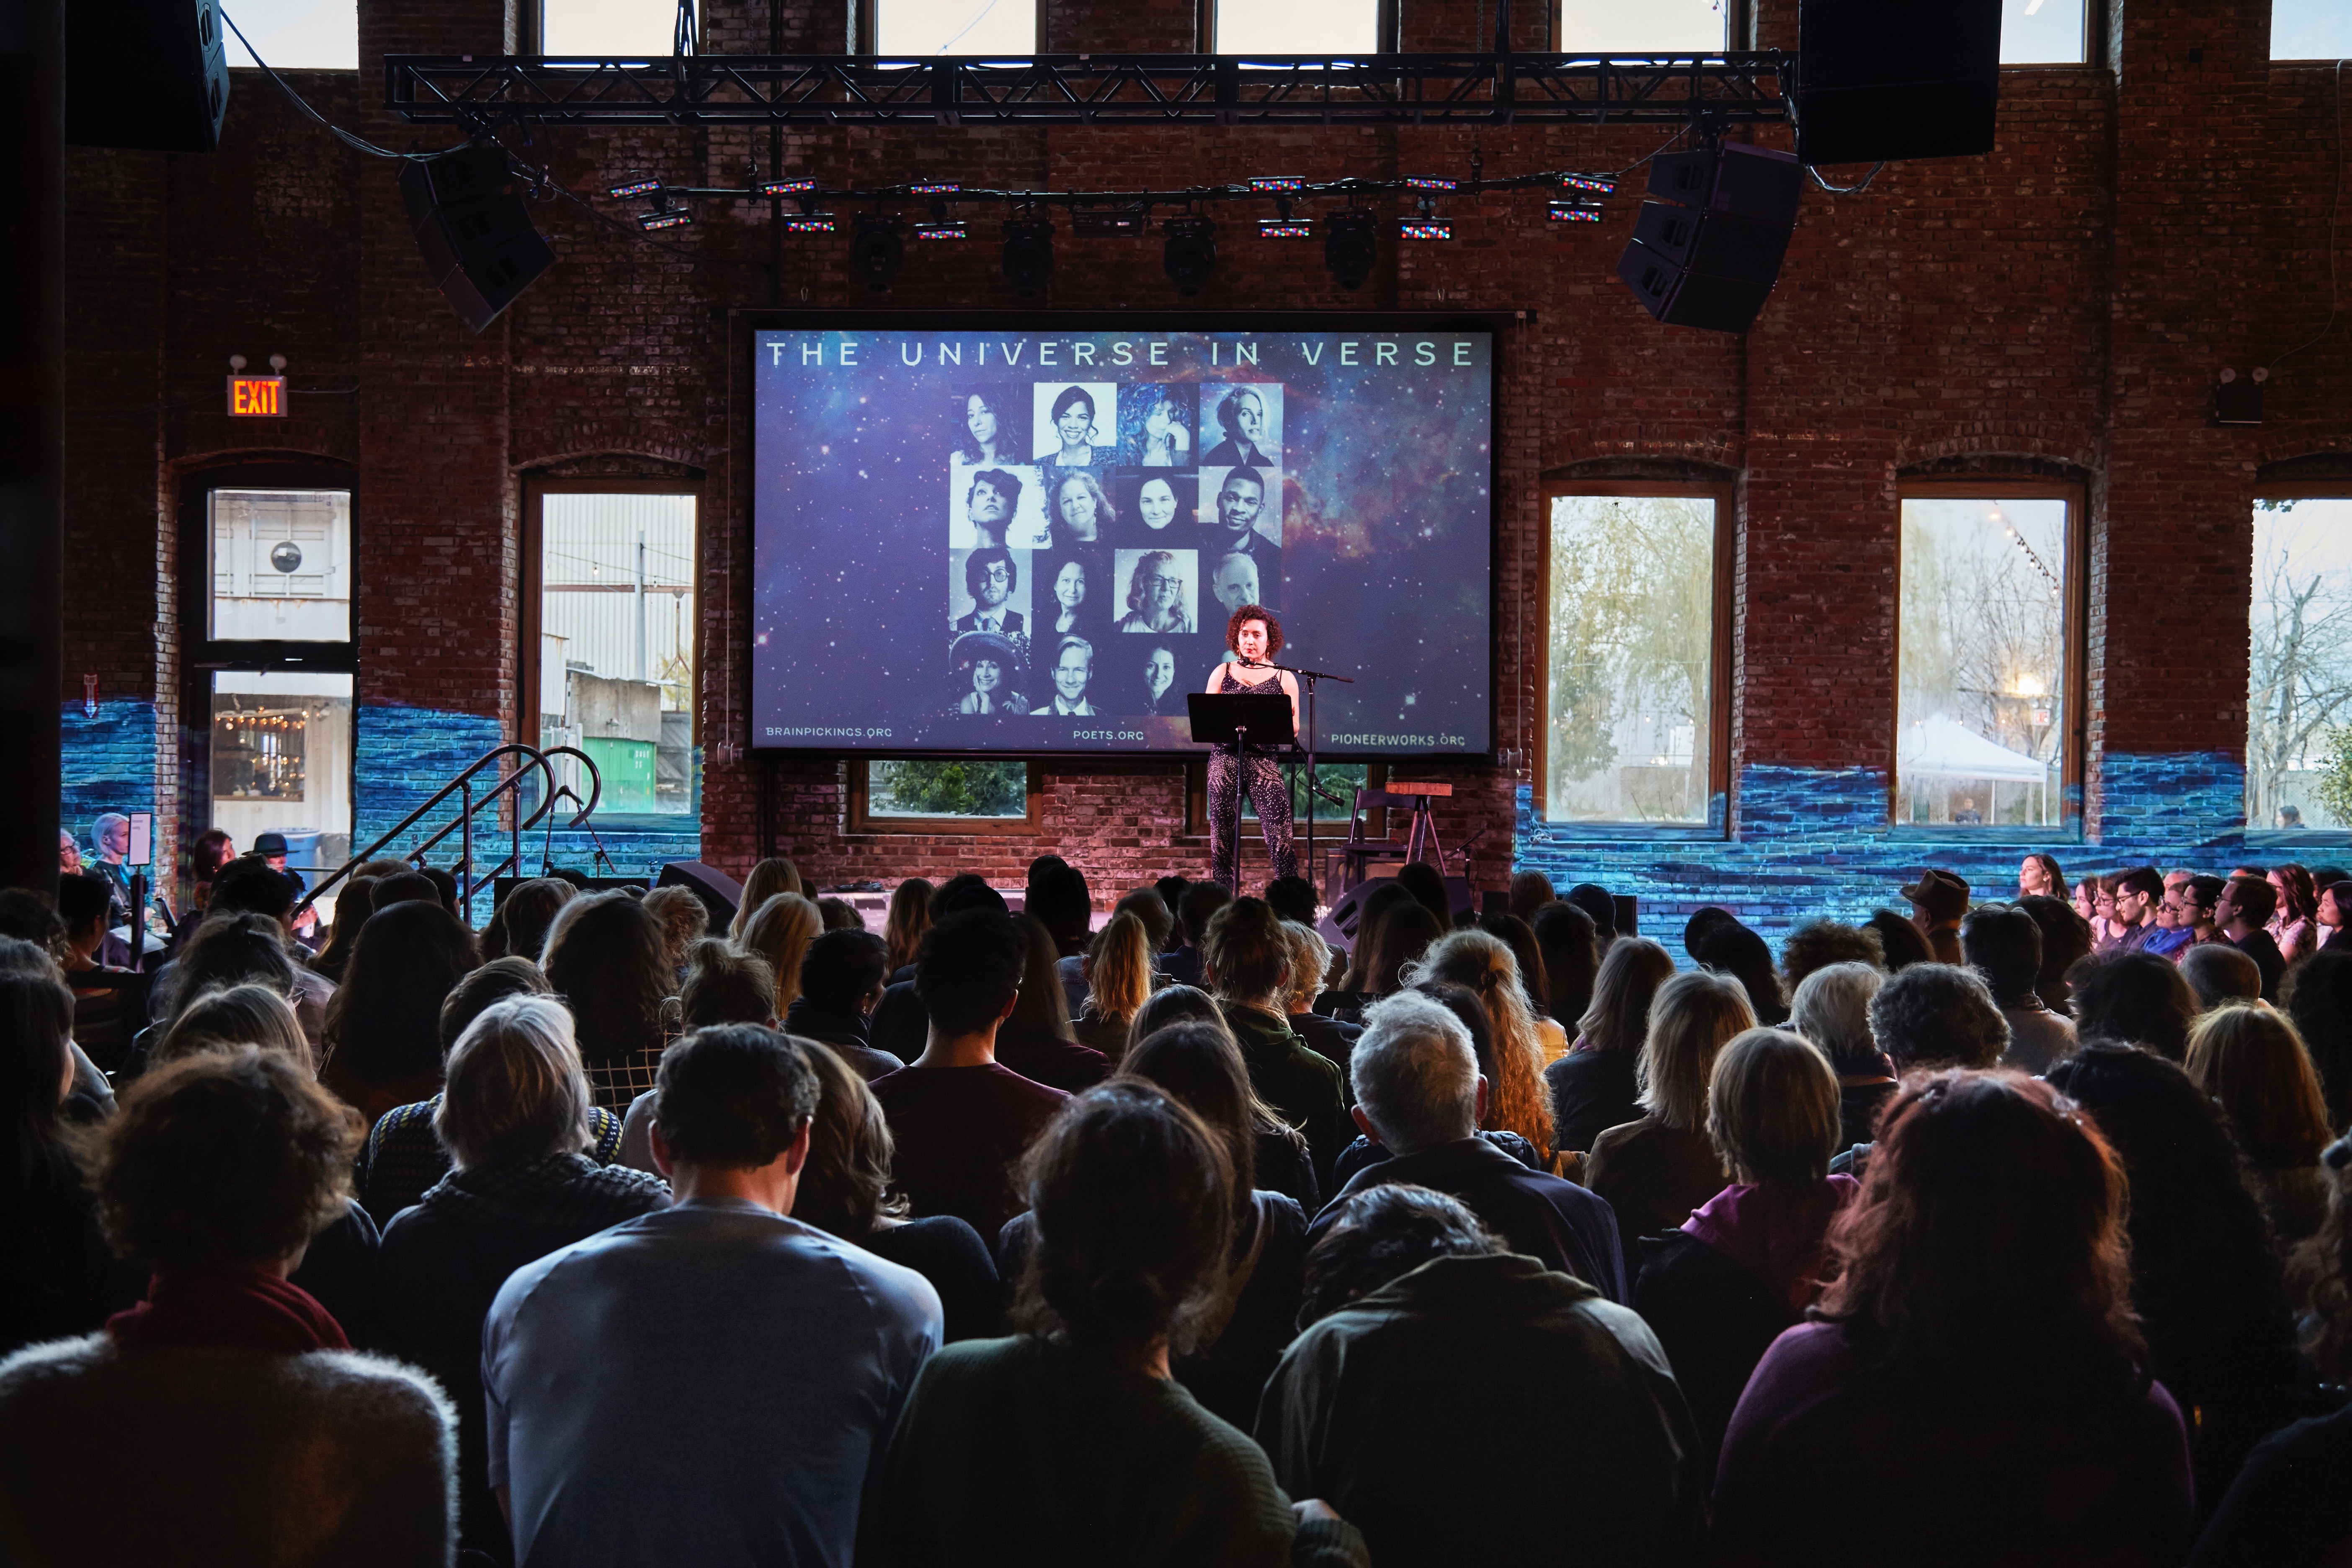 Photograph of an event in which approximately a hundred people are seated—we see the backs of their heads. In the background is a women on stage, reading (a poem). Behind her is a screen with text that reads 'The Universe In Verse,' which is flanked on both sides by a projection of video of water on a brick wall.